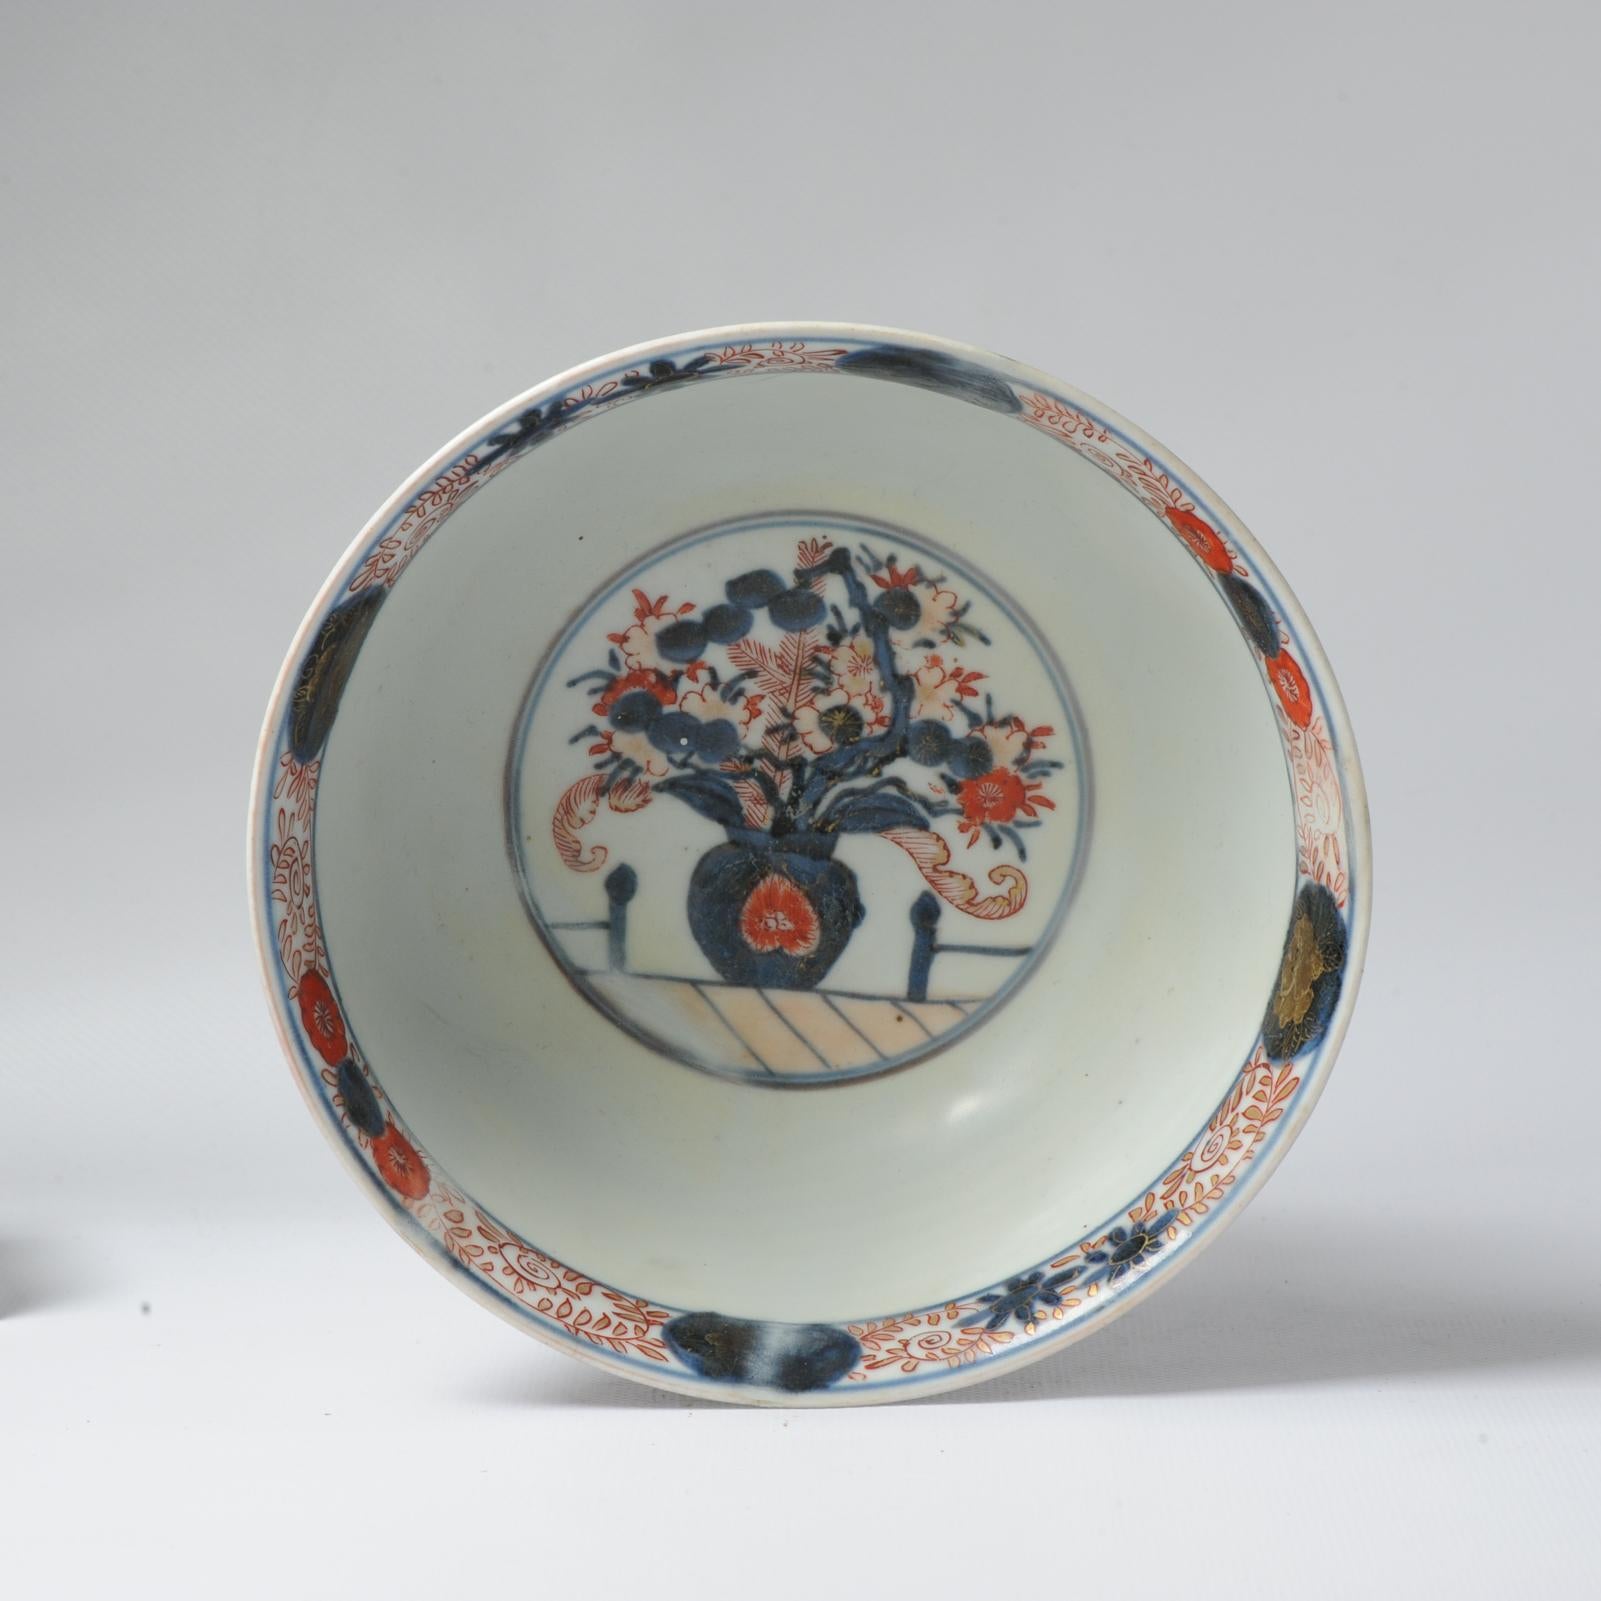 Lovely larger bowl from the edo period. With richly decorated landscape scene. Stunning piece.

Additional information:
Material: Porcelain & Pottery
Type: Bowls
Region of Origin: Japan
Period: 18th century Edo Period (1603–1867)
Age: